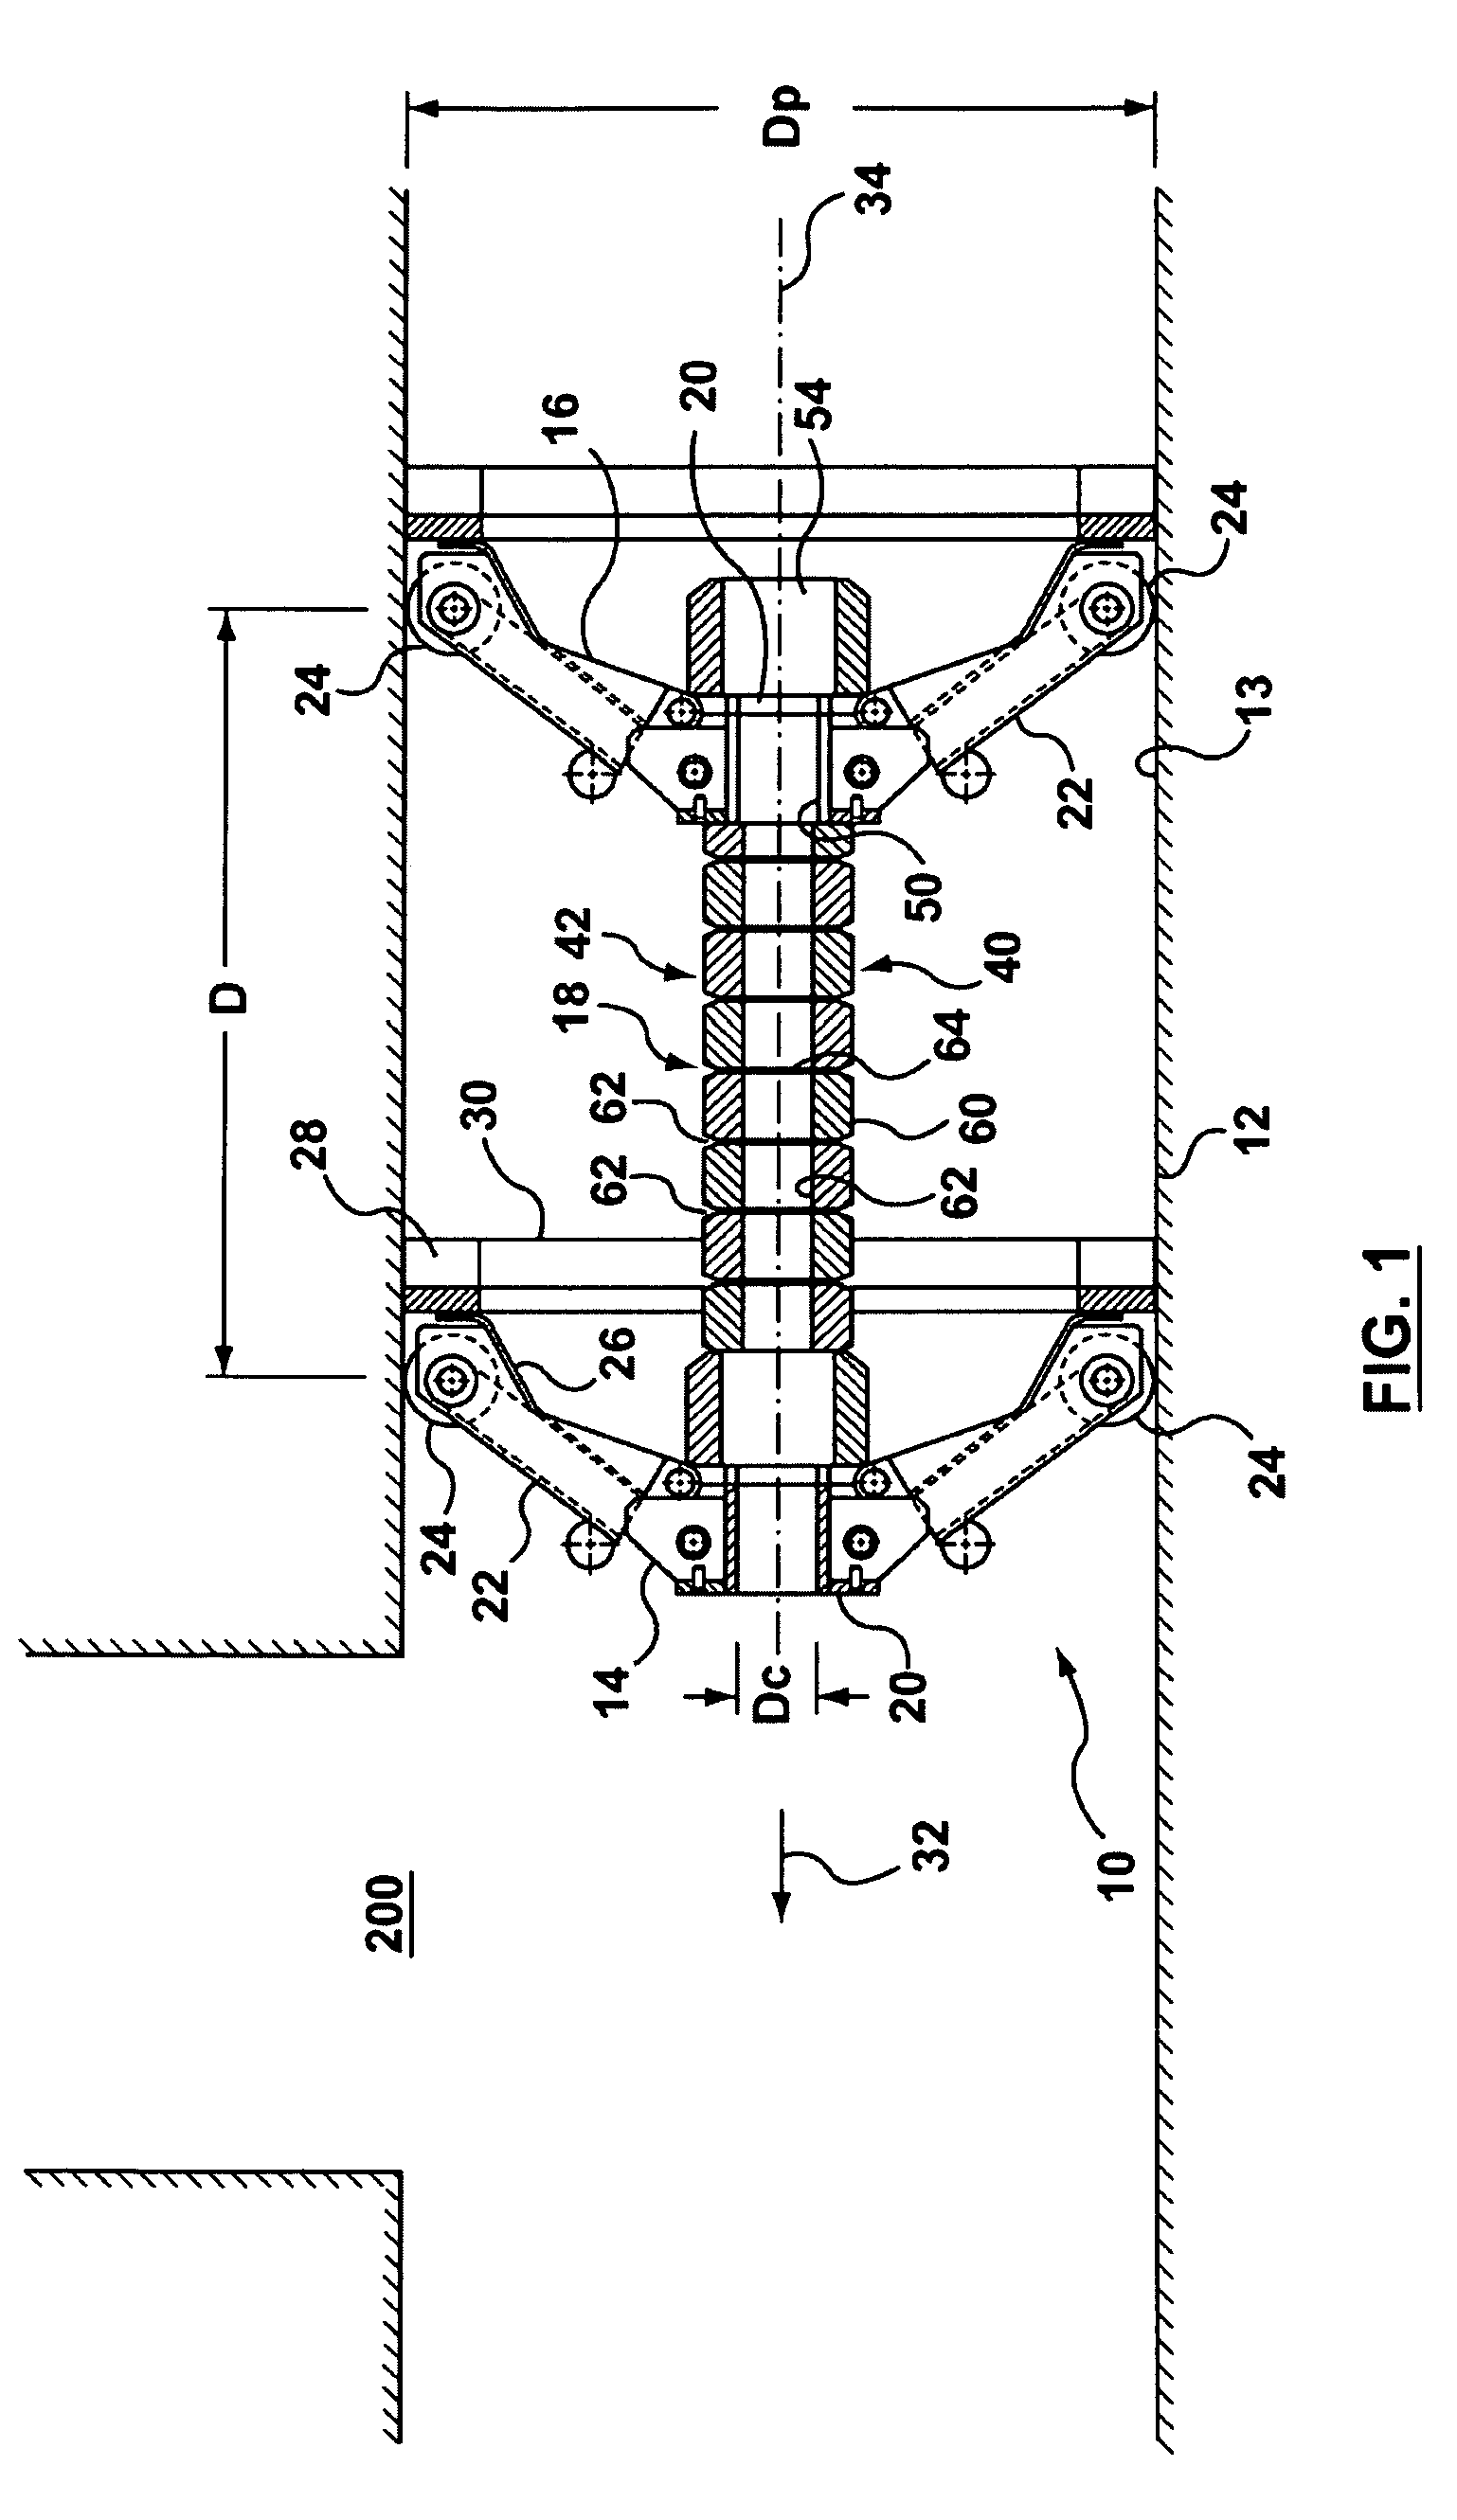 Device for moving a pig through a conduit, such as a pipeline